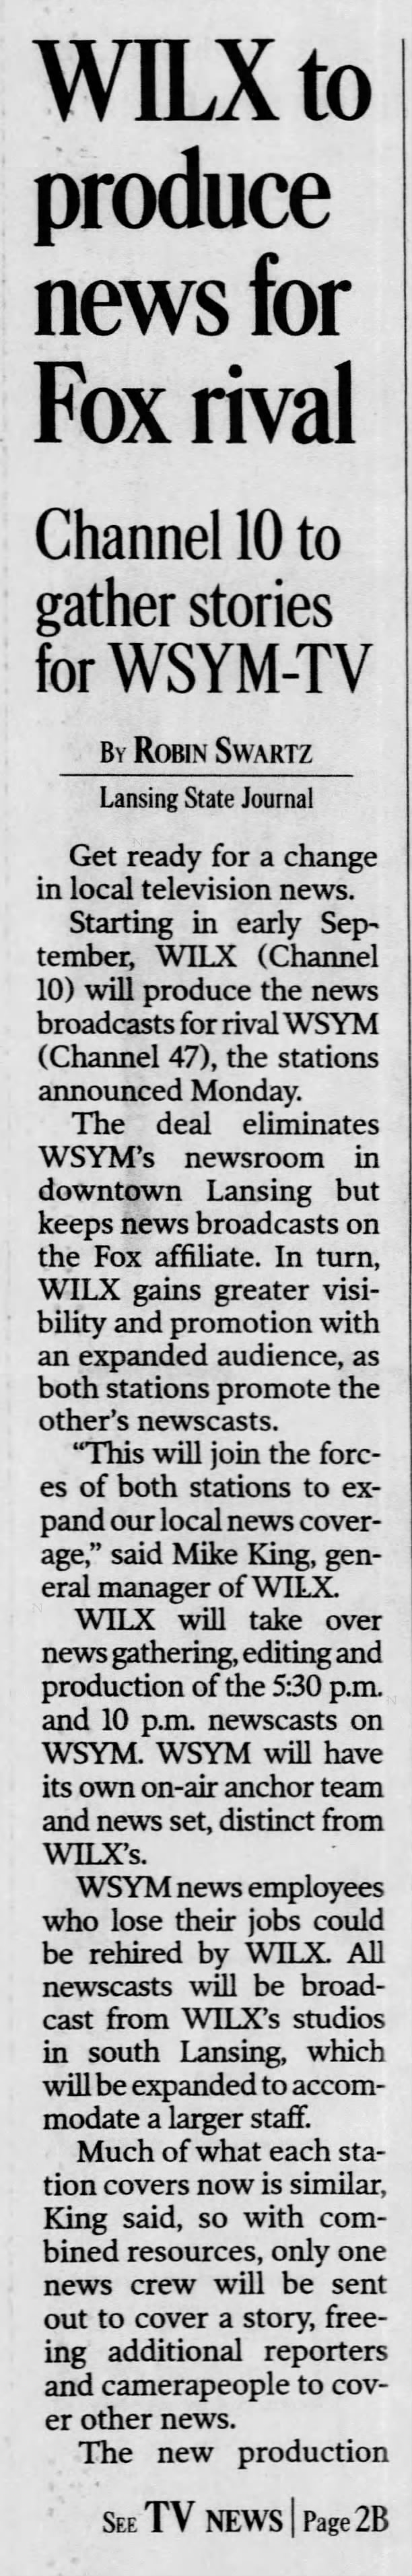 WILX to produce news for Fox rival: Channel 10 to gather stories for WSYM-TV